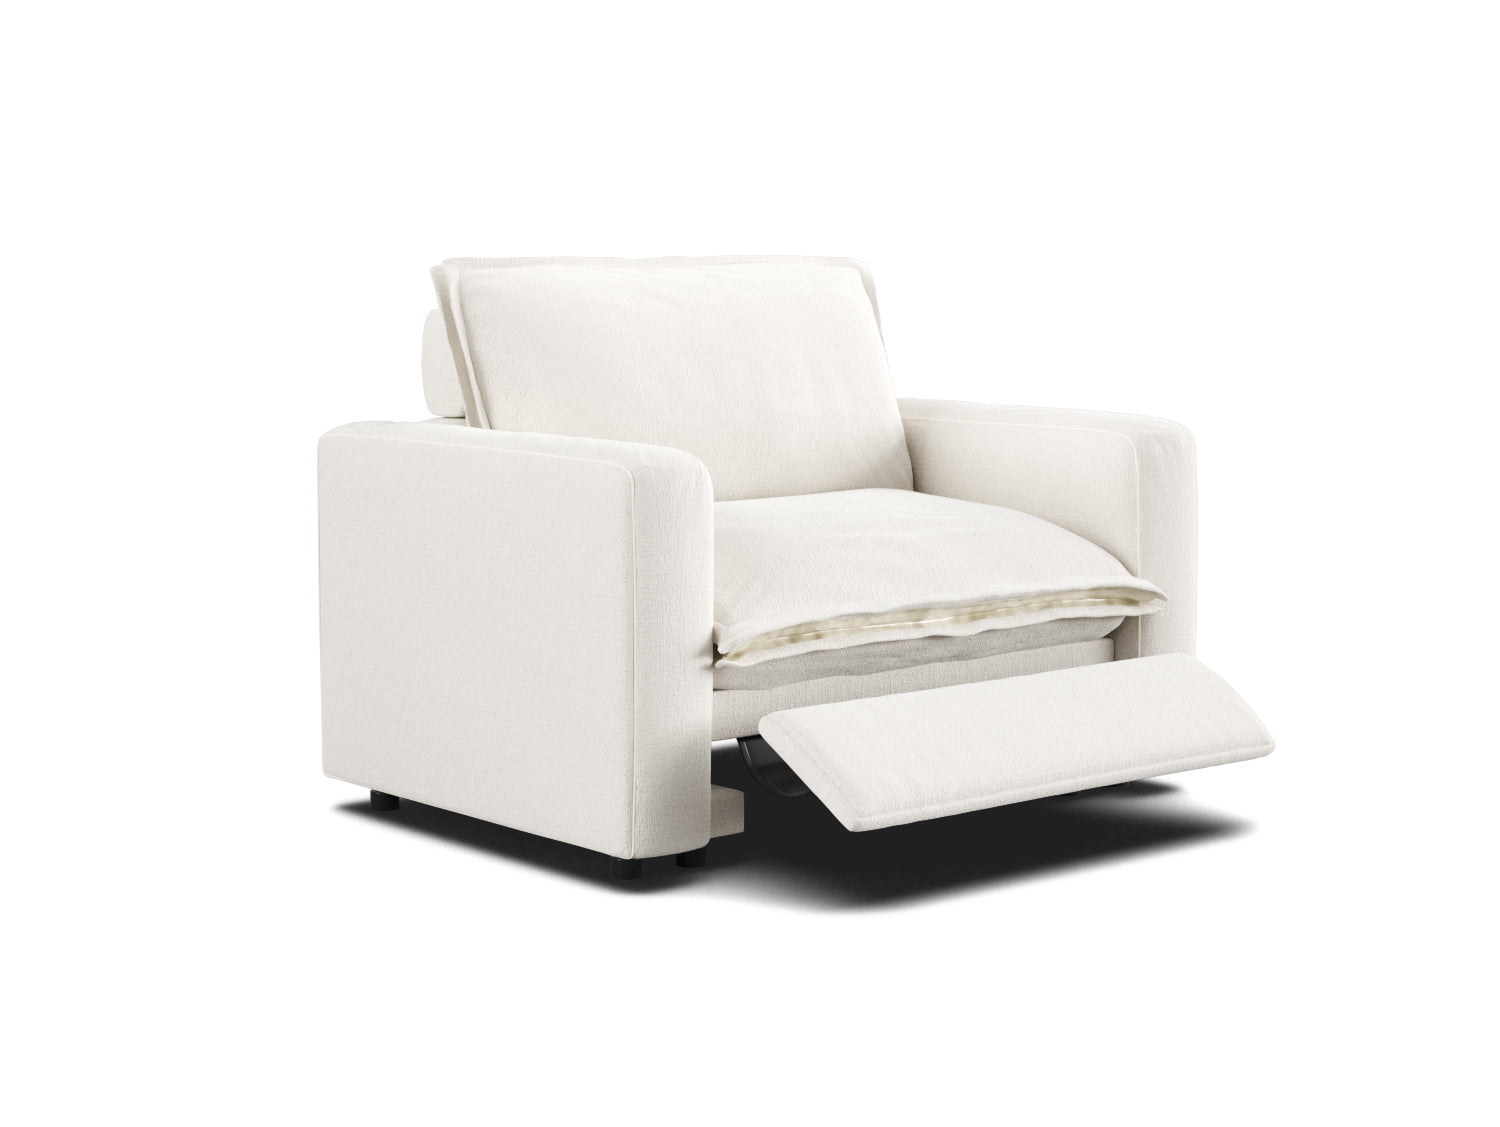 extra-comfort wide seat recliner chairs